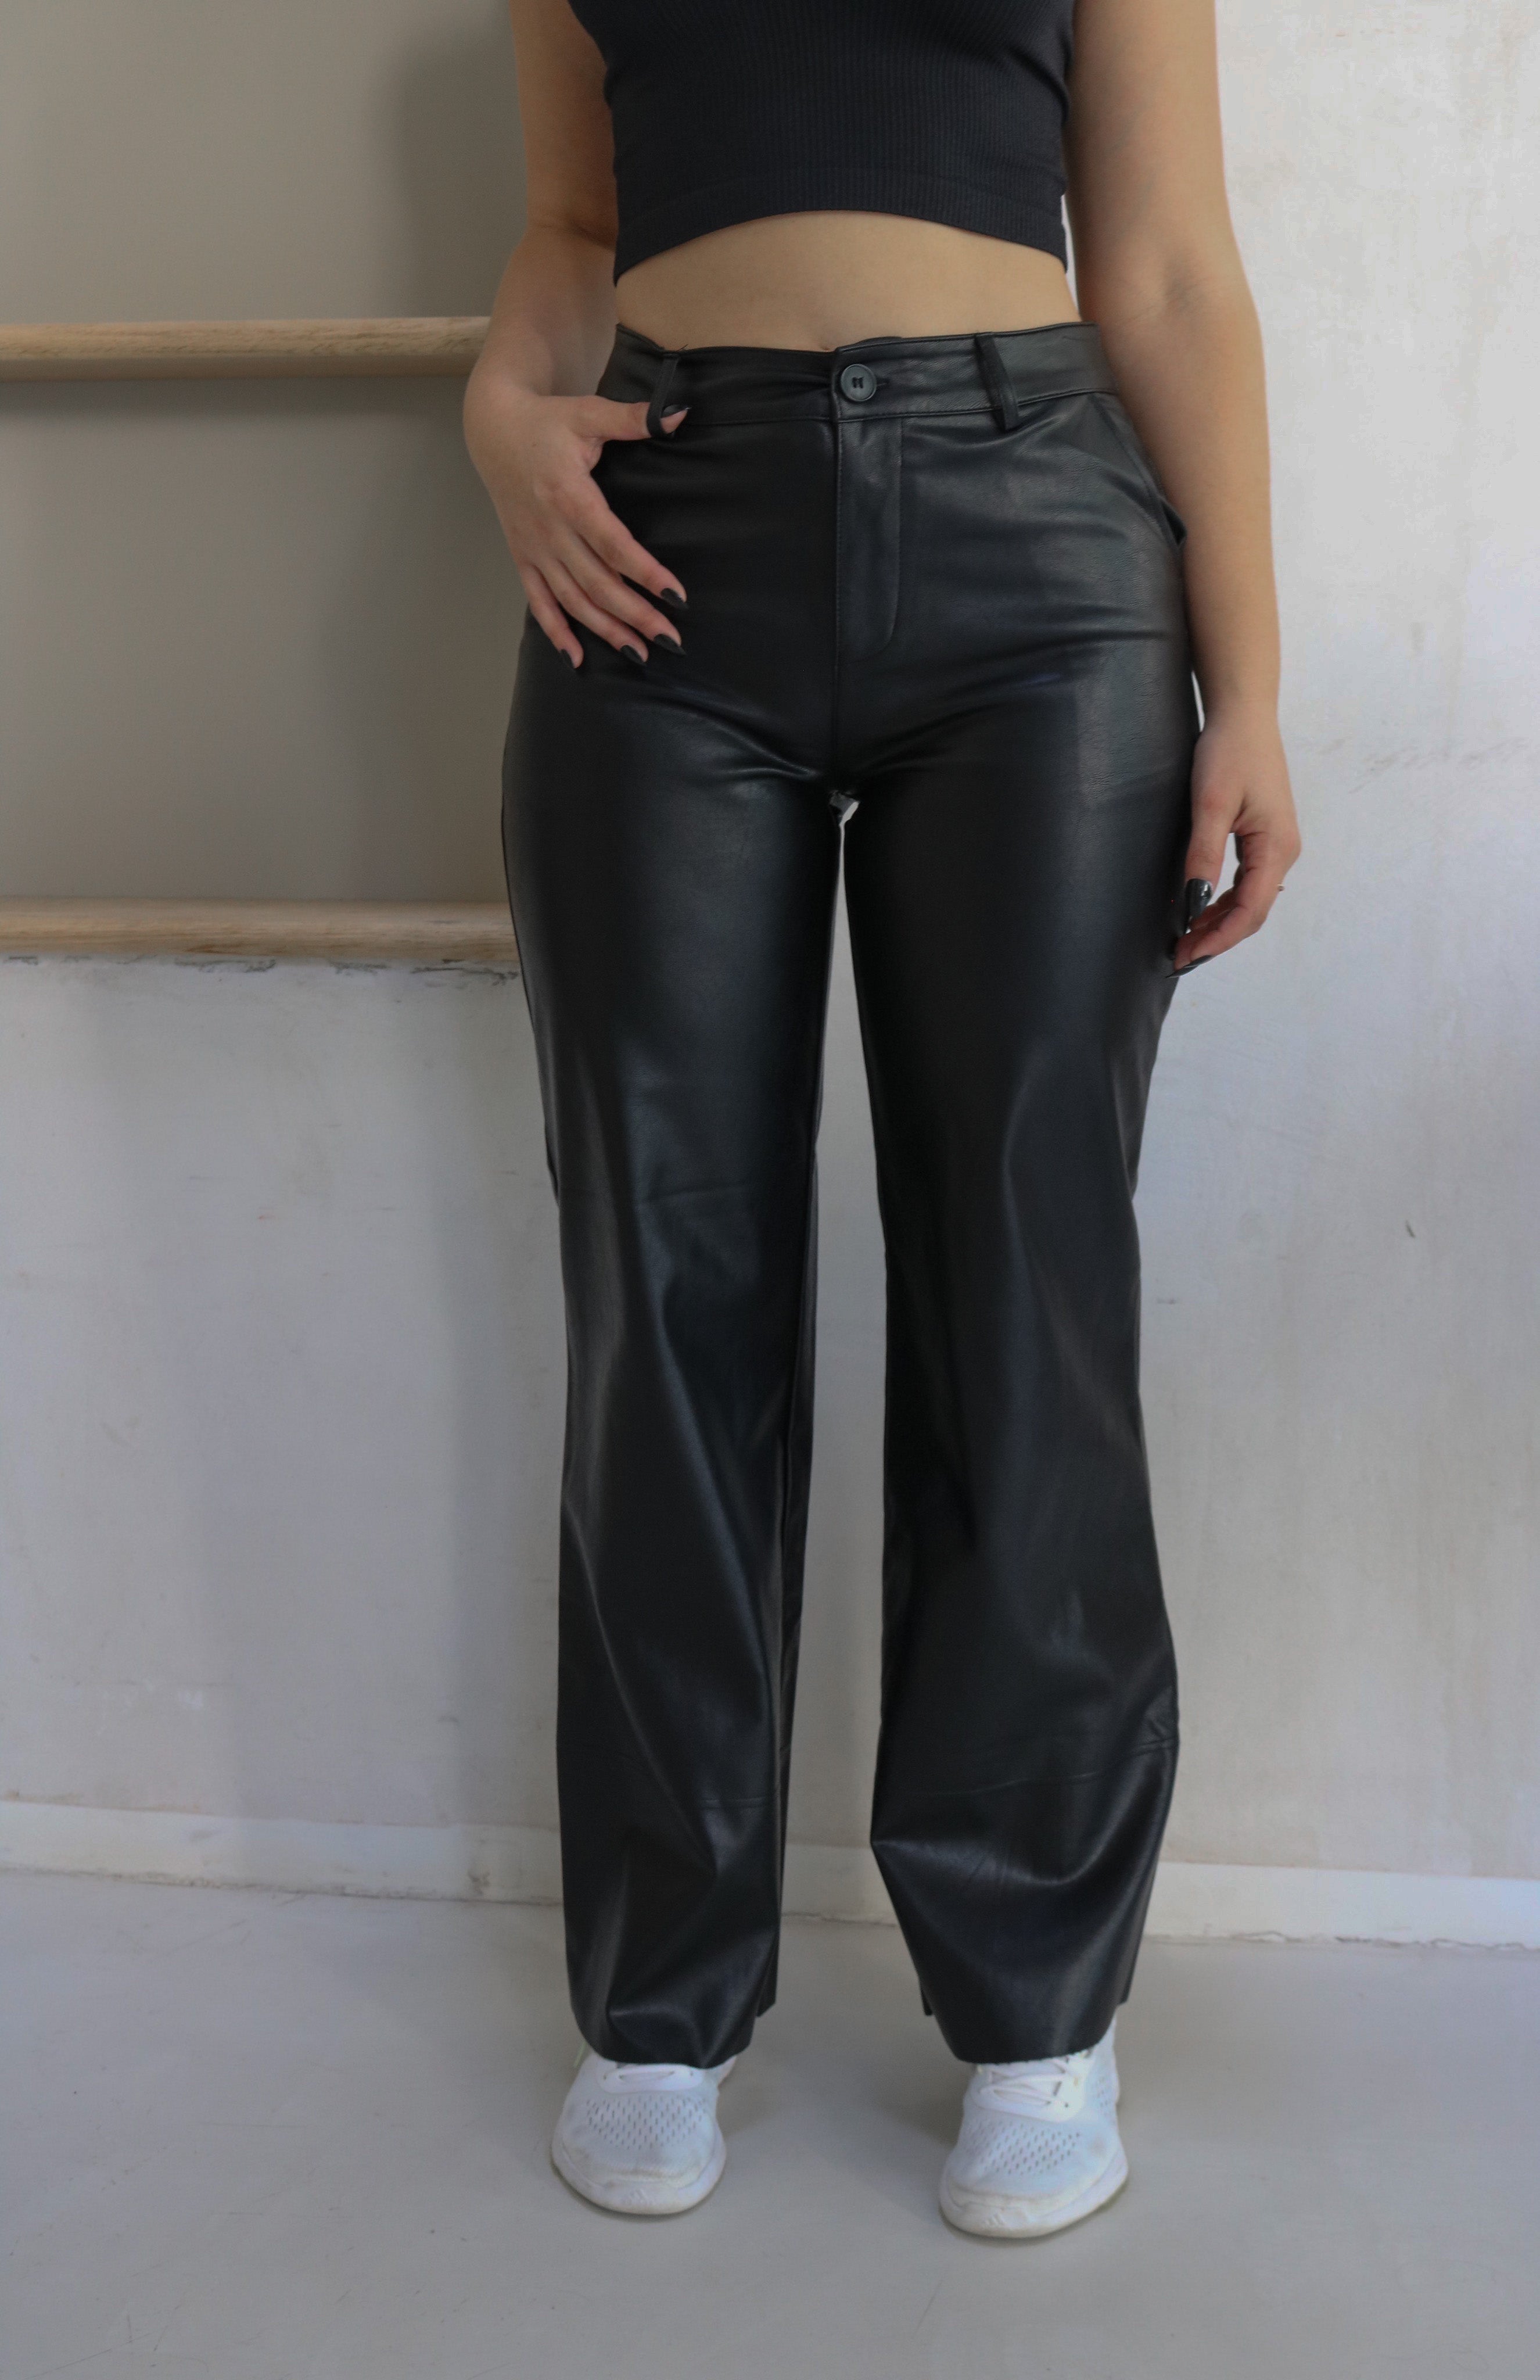 Faux Leather Pants in Black. Scarlette The Label, an online fashion boutique for women.